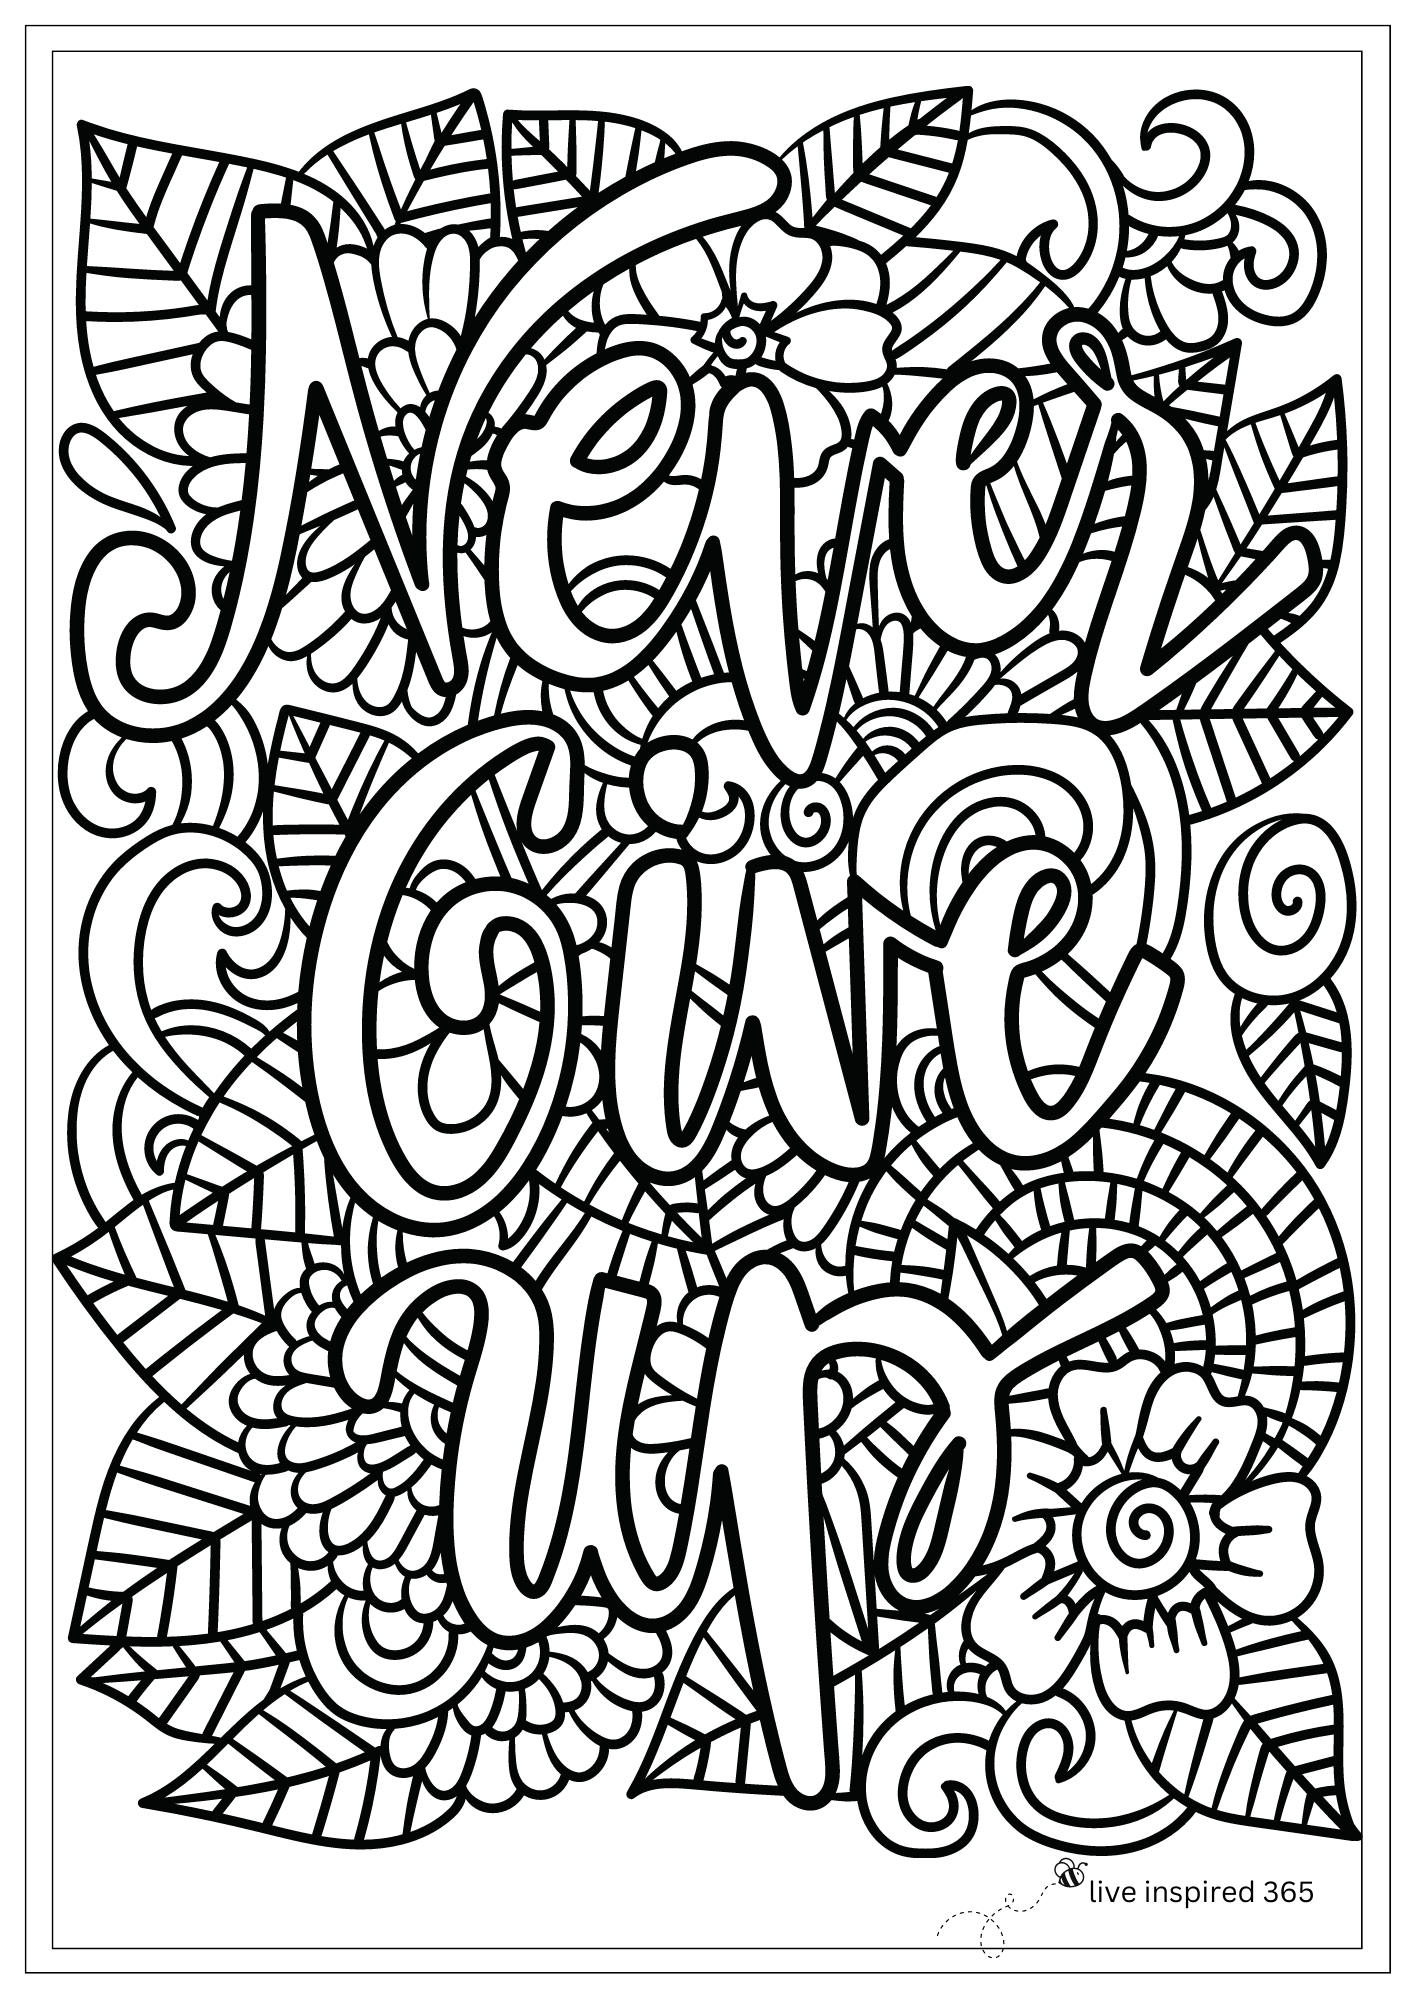 Never Give Up-Coloring Page